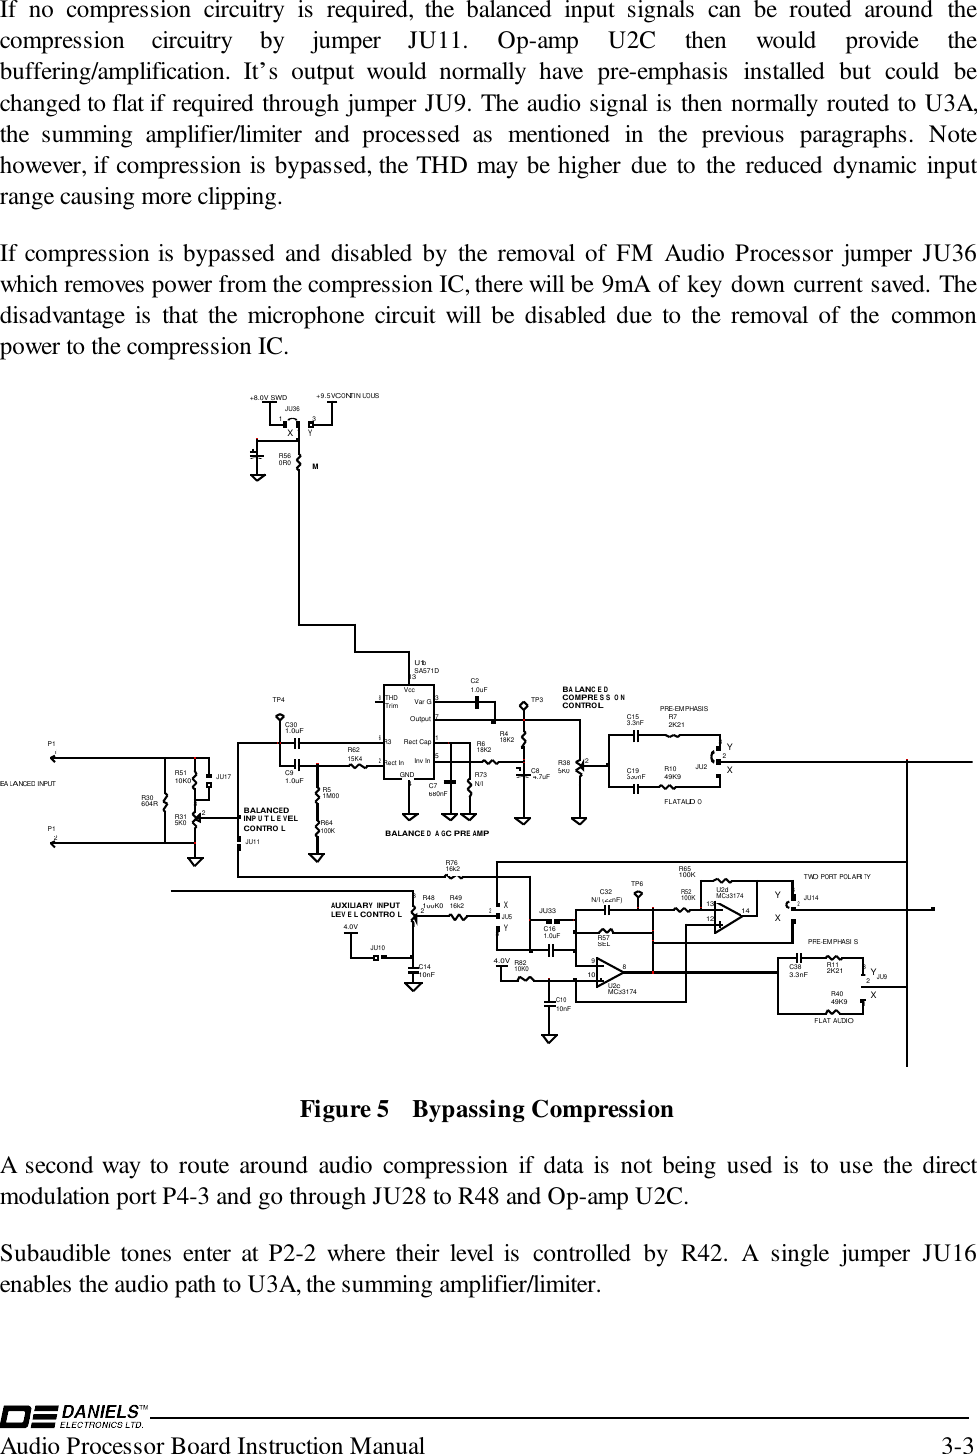 Audio Processor Board Instruction Manual 3-3If no compression circuitry is required, the balanced input signals can be routed around thecompression circuitry by jumper JU11. Op-amp U2C then would provide thebuffering/amplification. It’s output would normally have pre-emphasis installed but could bechanged to flat if required through jumper JU9. The audio signal is then normally routed to U3A,the summing amplifier/limiter and processed as mentioned in the previous paragraphs. Notehowever, if compression is bypassed, the THD may be higher due to the reduced dynamic inputrange causing more clipping.If compression is bypassed and disabled by the removal of FM Audio Processor jumper JU36which removes power from the compression IC, there will be 9mA of key down current saved. Thedisadvantage is that the microphone circuit will be disabled due to the removal of the commonpower to the compression IC.BALANCEDINPUT LE VELCONTRO LBALANCED INPUTXYAUXILIARY INPUT  LEV EL CONTRO LBALANCED AGC PREAMPBALANCEDCOMPRESSIONCONTROLFLAT AUDIOPRE-EMPHASISXYXYFLAT AUDIOPRE-EMPHASI SXYTWO PORT POLARITY2P11P1C1010nF123JU5321100K0R48680nFC74.7uFC8TP3SELR57N/I (22nF)C32VccRect InVar GRect CapOutputInv InR3THD Trim GND2317568134SA571DU1b9108U2MC33174cR73N/I131214U2MC33174d4.0VTP6C91.0uFC301.0uFR8210K0R4916k2C1410nF4.0VR7616k2C161.0uFJU33R6215K4R51M00R418K2R618K2C153.3nF R72K21R1049K9330nFC19C21.0uFR5110K0213JU2JU11TP4JU10R52100KR65100KC383.3nFR112K21R4049K9213JU14123R315K0R30604RR64100KJU17123JU93215K0R38+9.5V CONTIN UOUSXYM+8.0V SWDR560R0231JU36Figure 5 Bypassing CompressionA second way to route around audio compression if data is not being used is to use the directmodulation port P4-3 and go through JU28 to R48 and Op-amp U2C.Subaudible tones enter at P2-2 where their level is controlled by R42. A single jumper JU16enables the audio path to U3A, the summing amplifier/limiter.